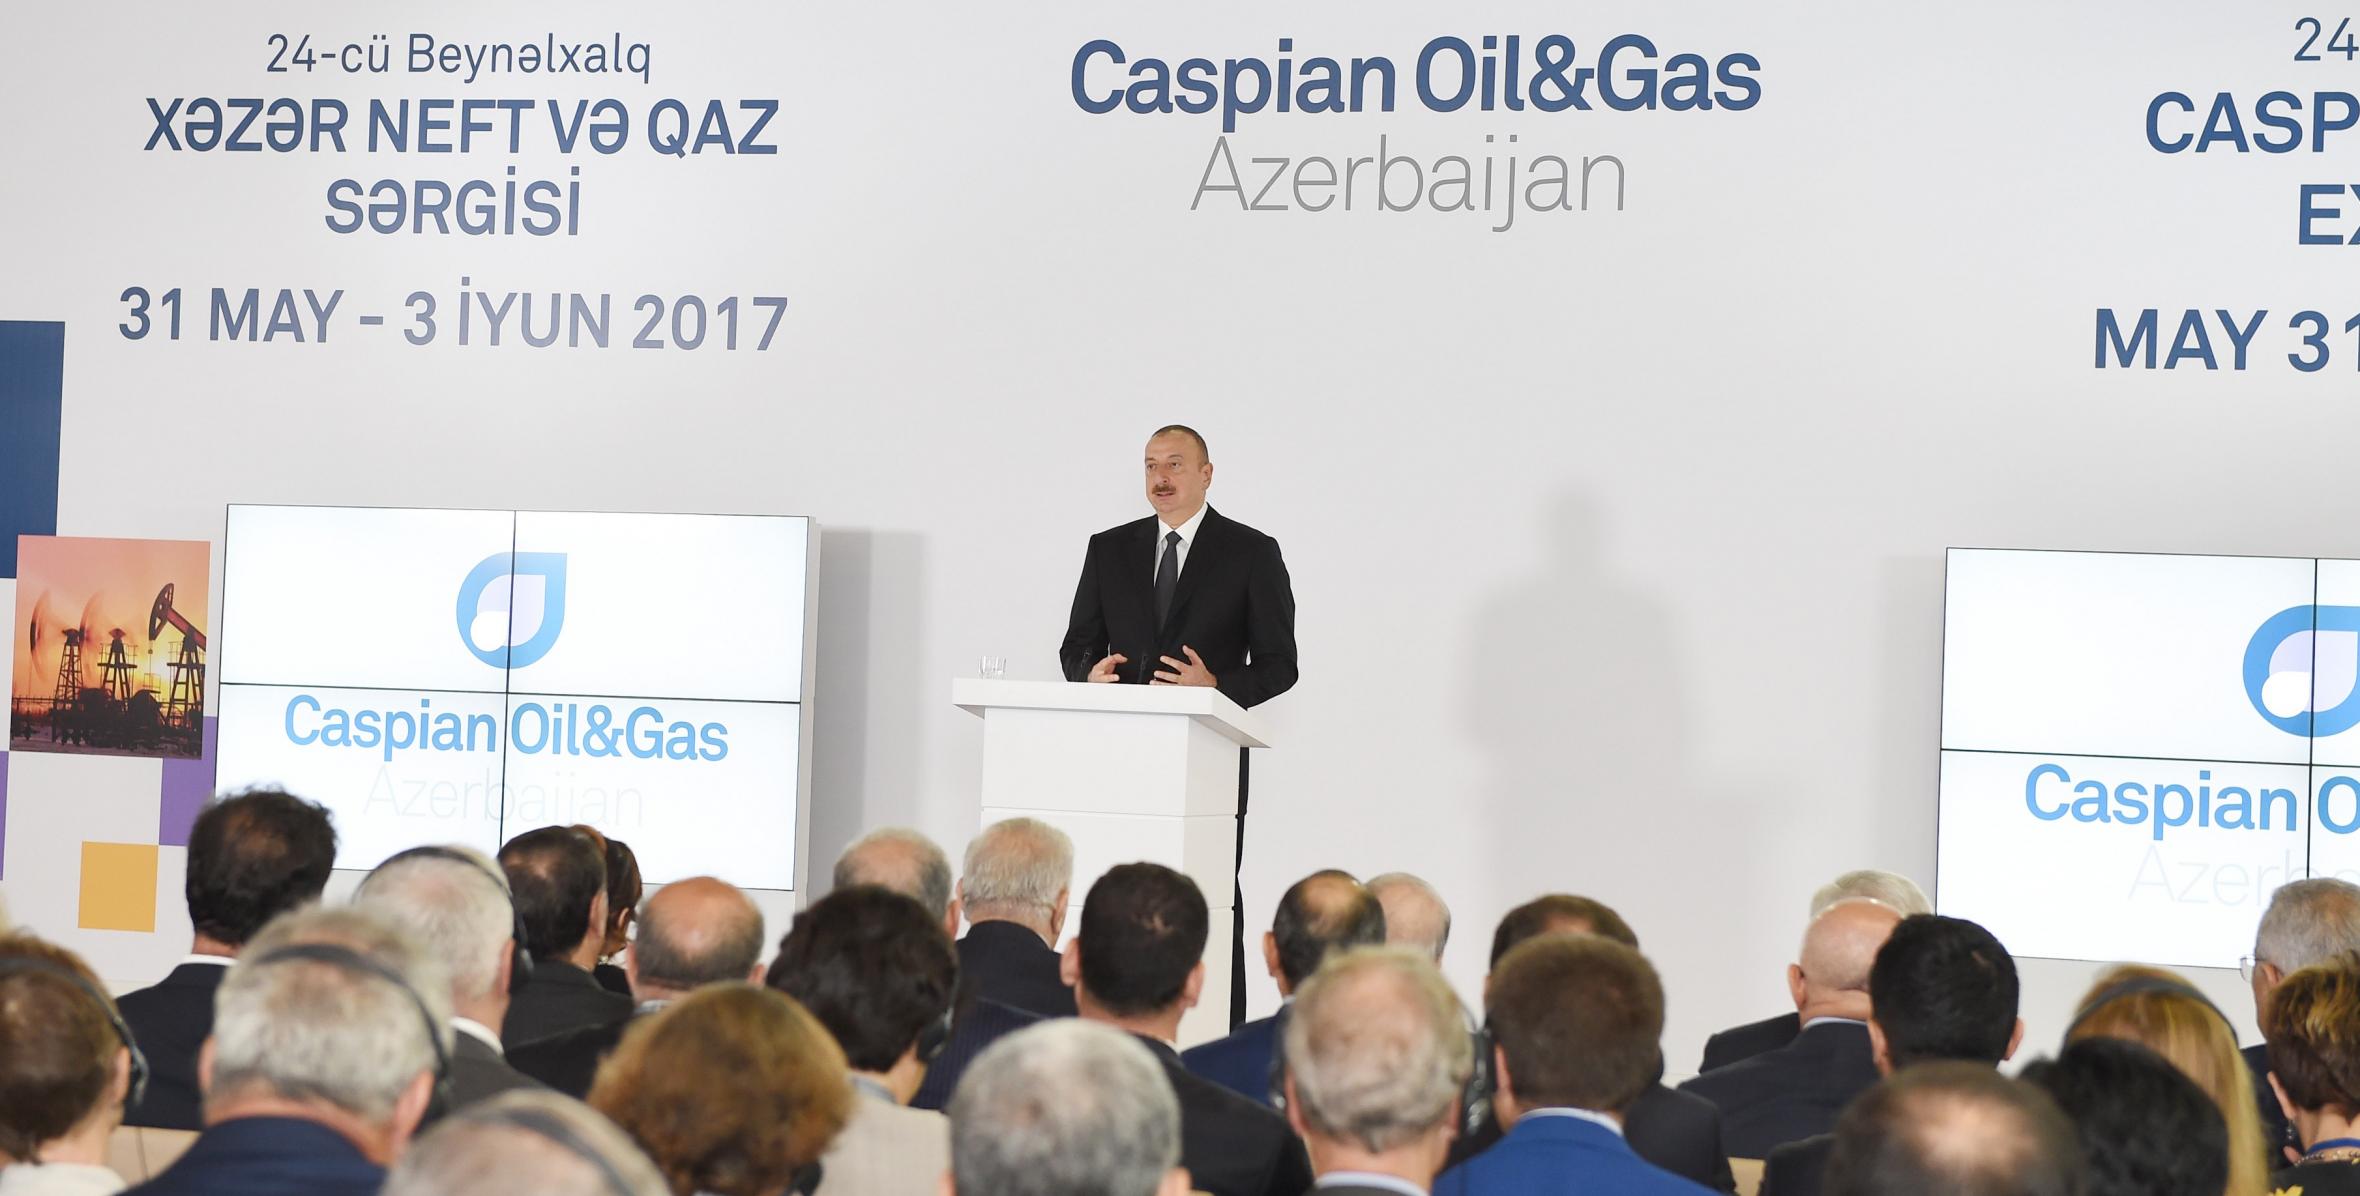 Speech by Ilham Aliyev at opening of 24th International Caspian Oil & Gas Exhibition and Conference